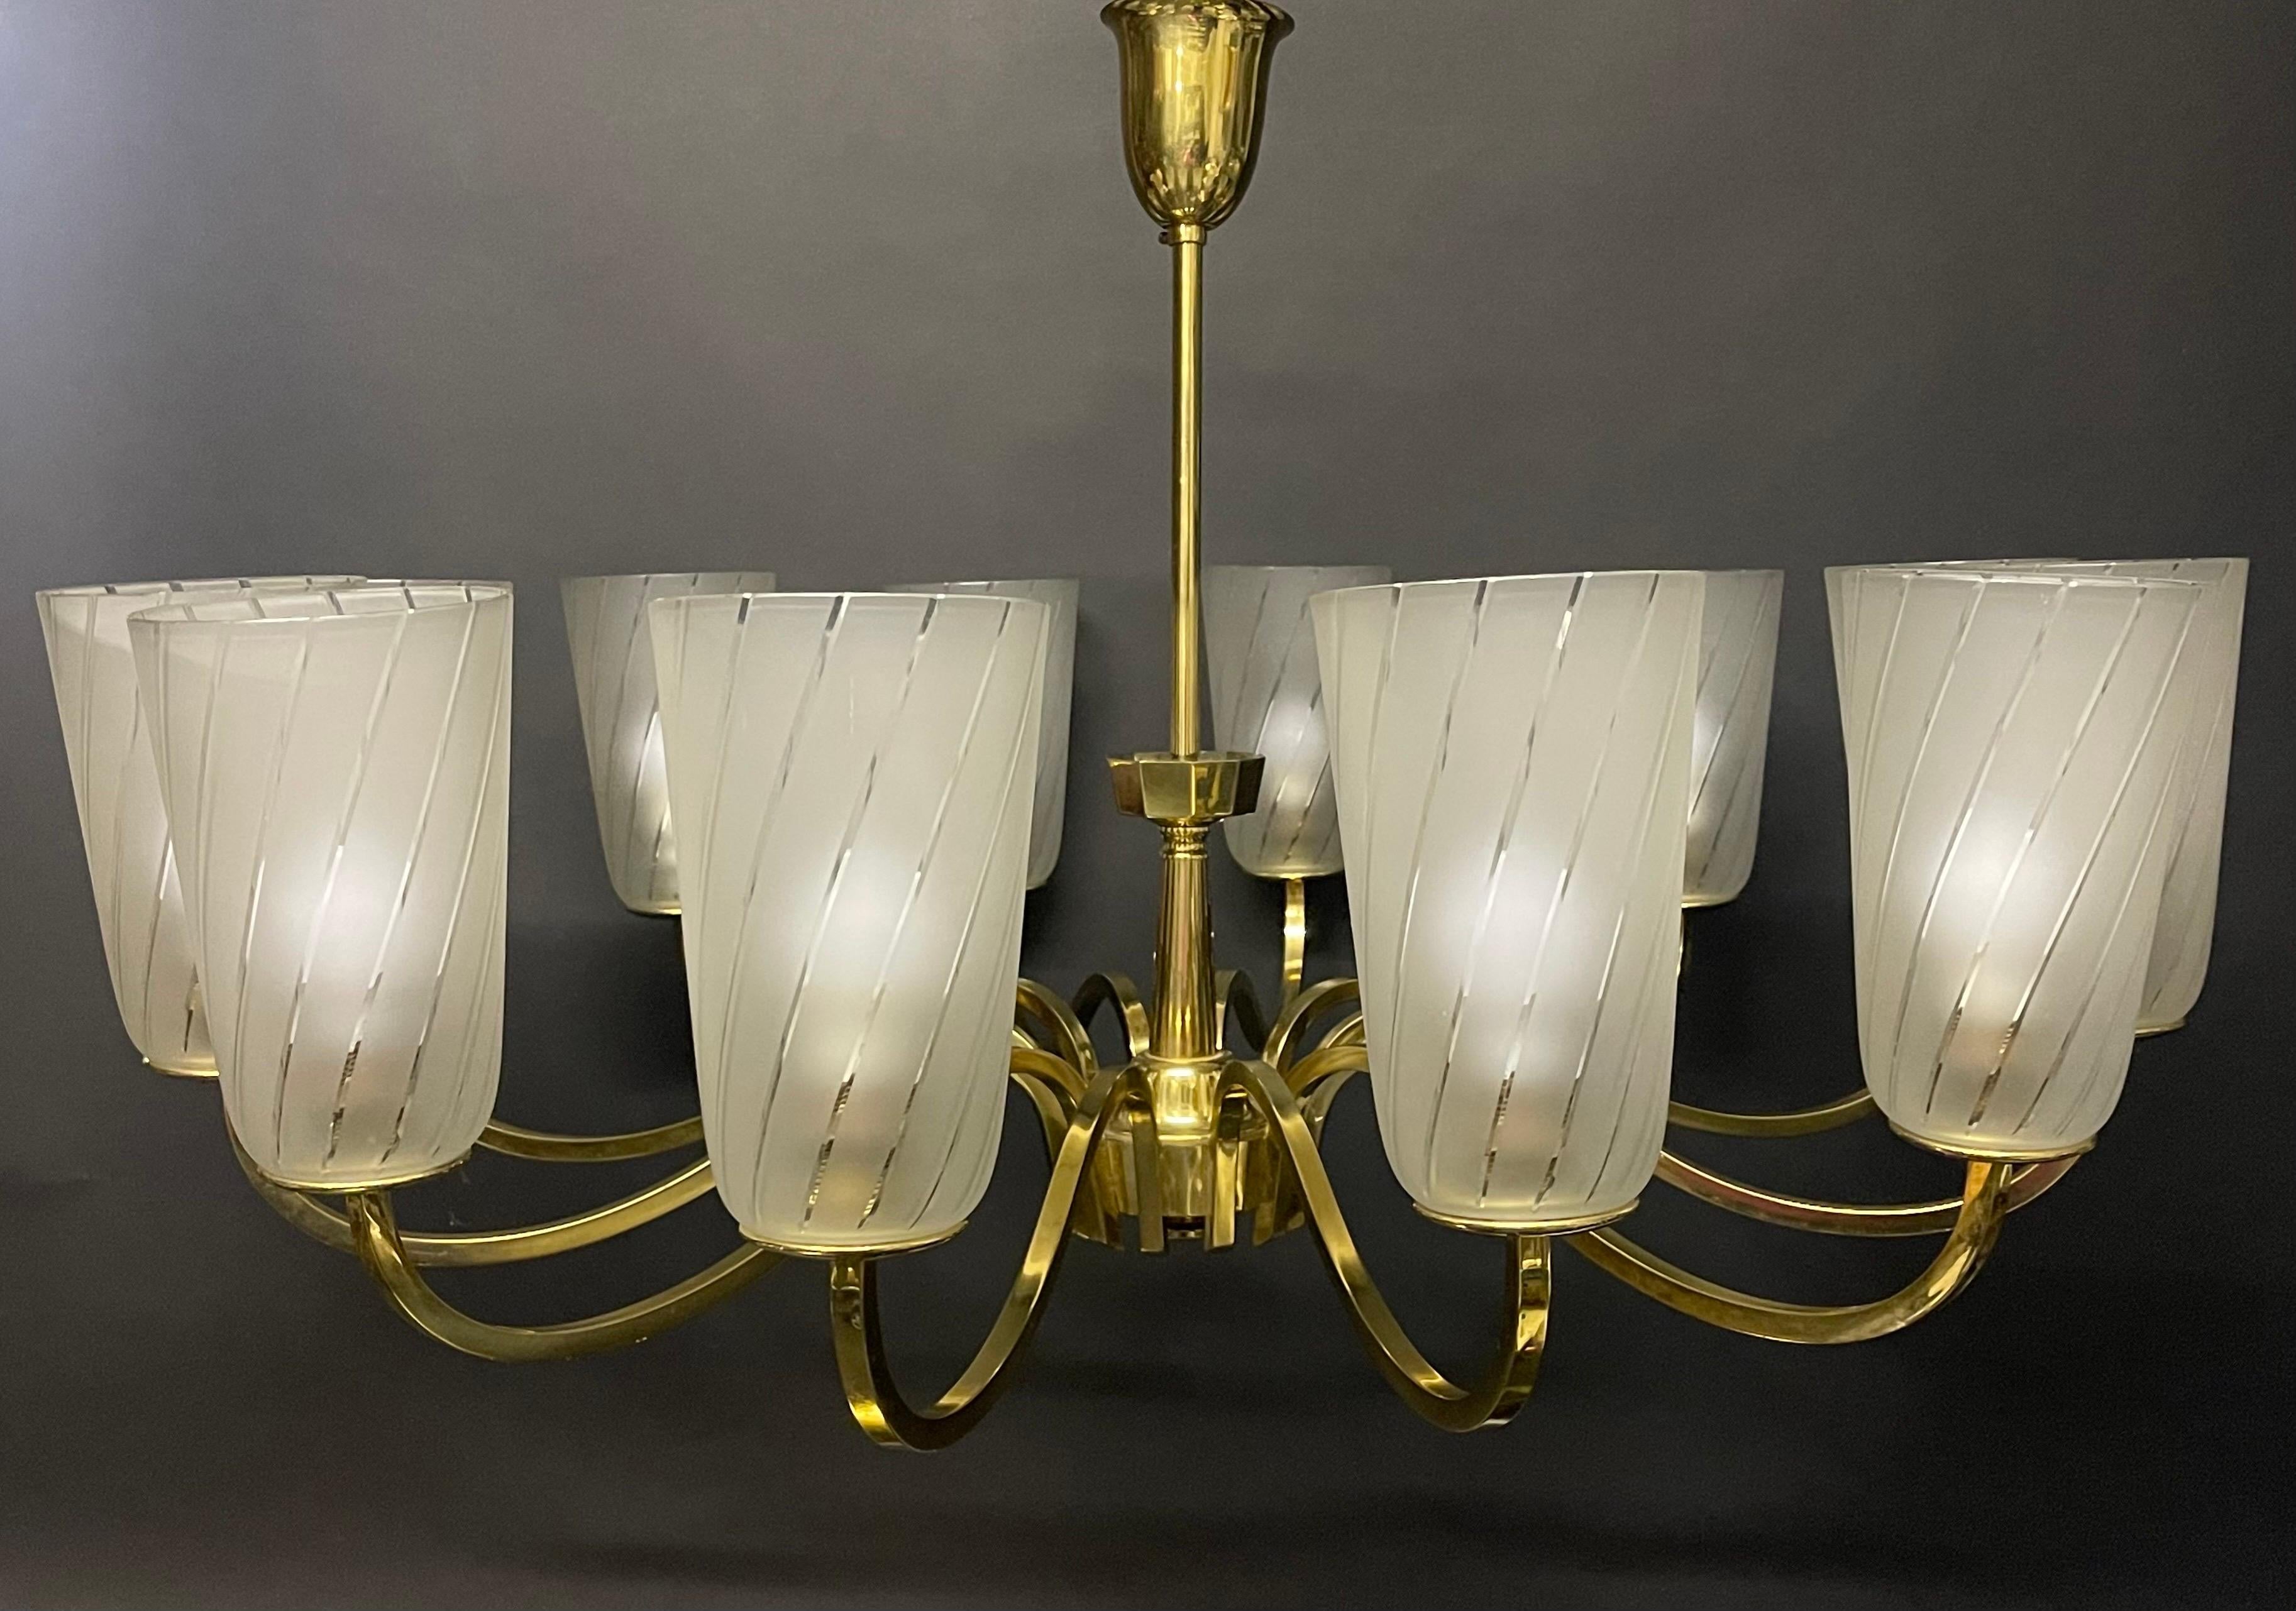 Huge German Art Deco Polished Brass and Frosted Glass Chandelier, 1940s For Sale 5